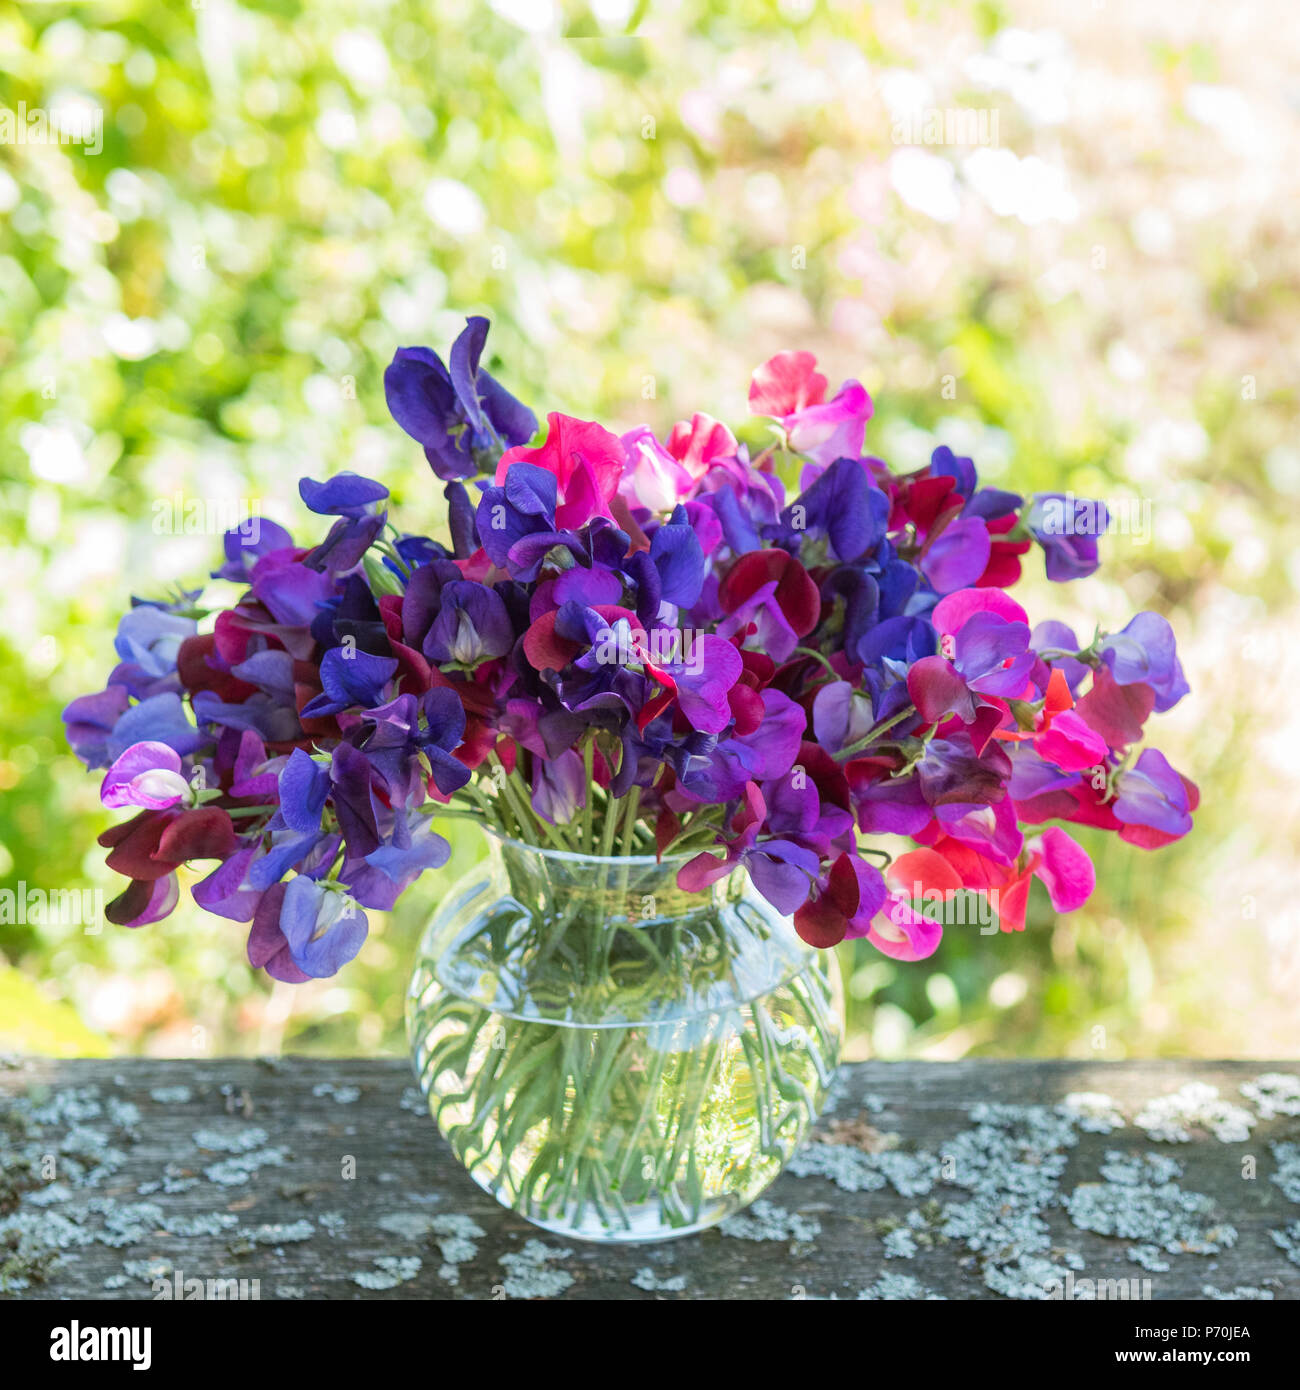 sweet peas - bunch of pink and purple sweet peas in glass vase on garden table Stock Photo